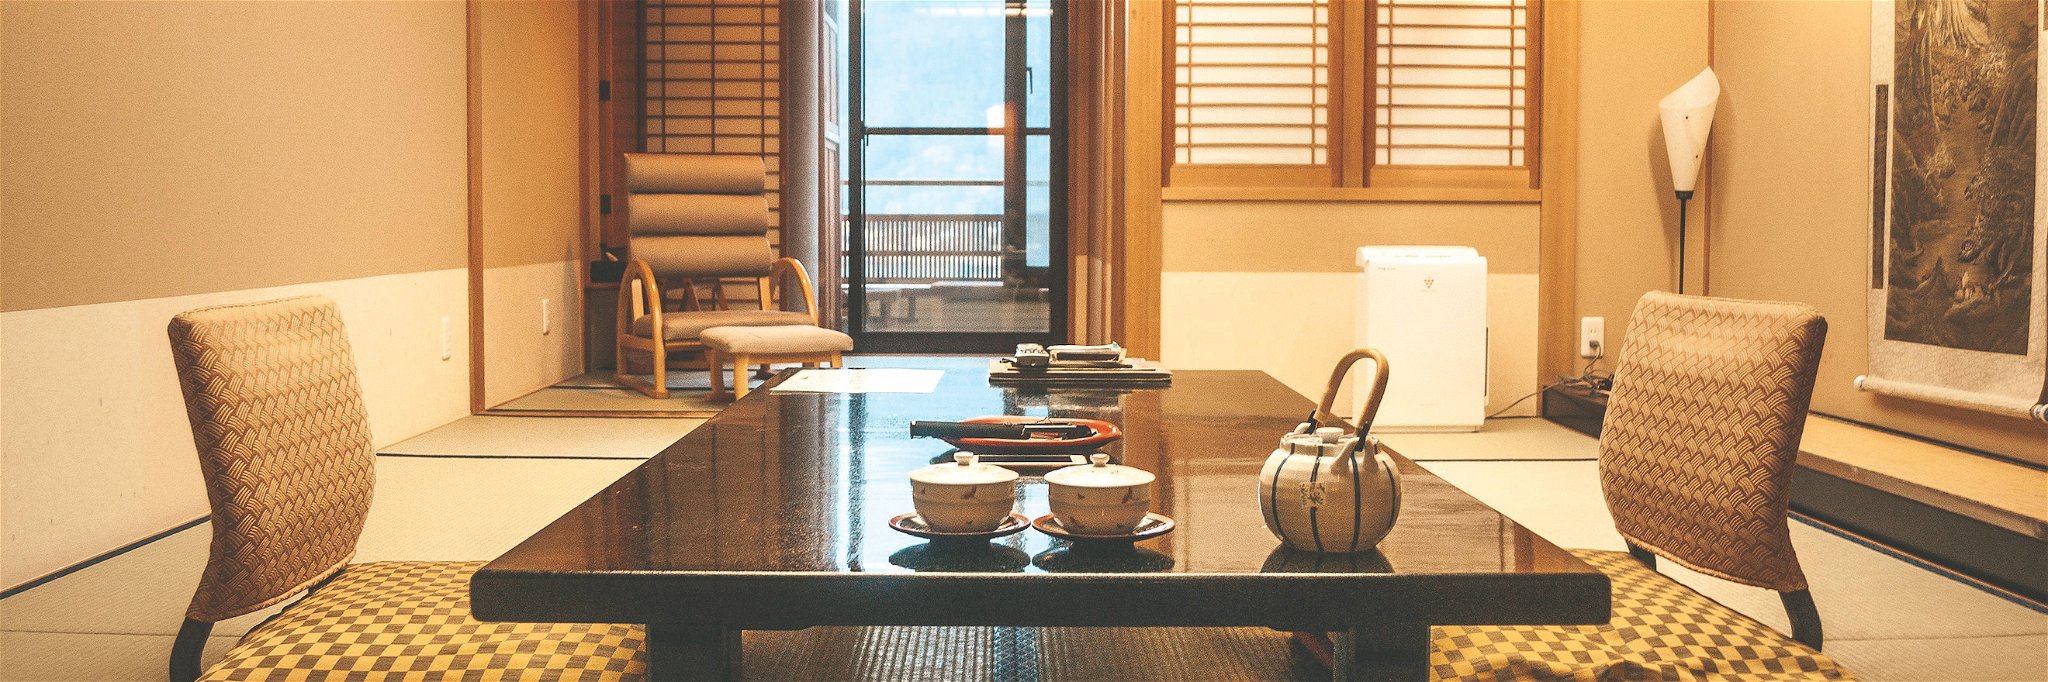 The scent of tatami mats is integral to the multi-sensory experience of a ryokan stay.